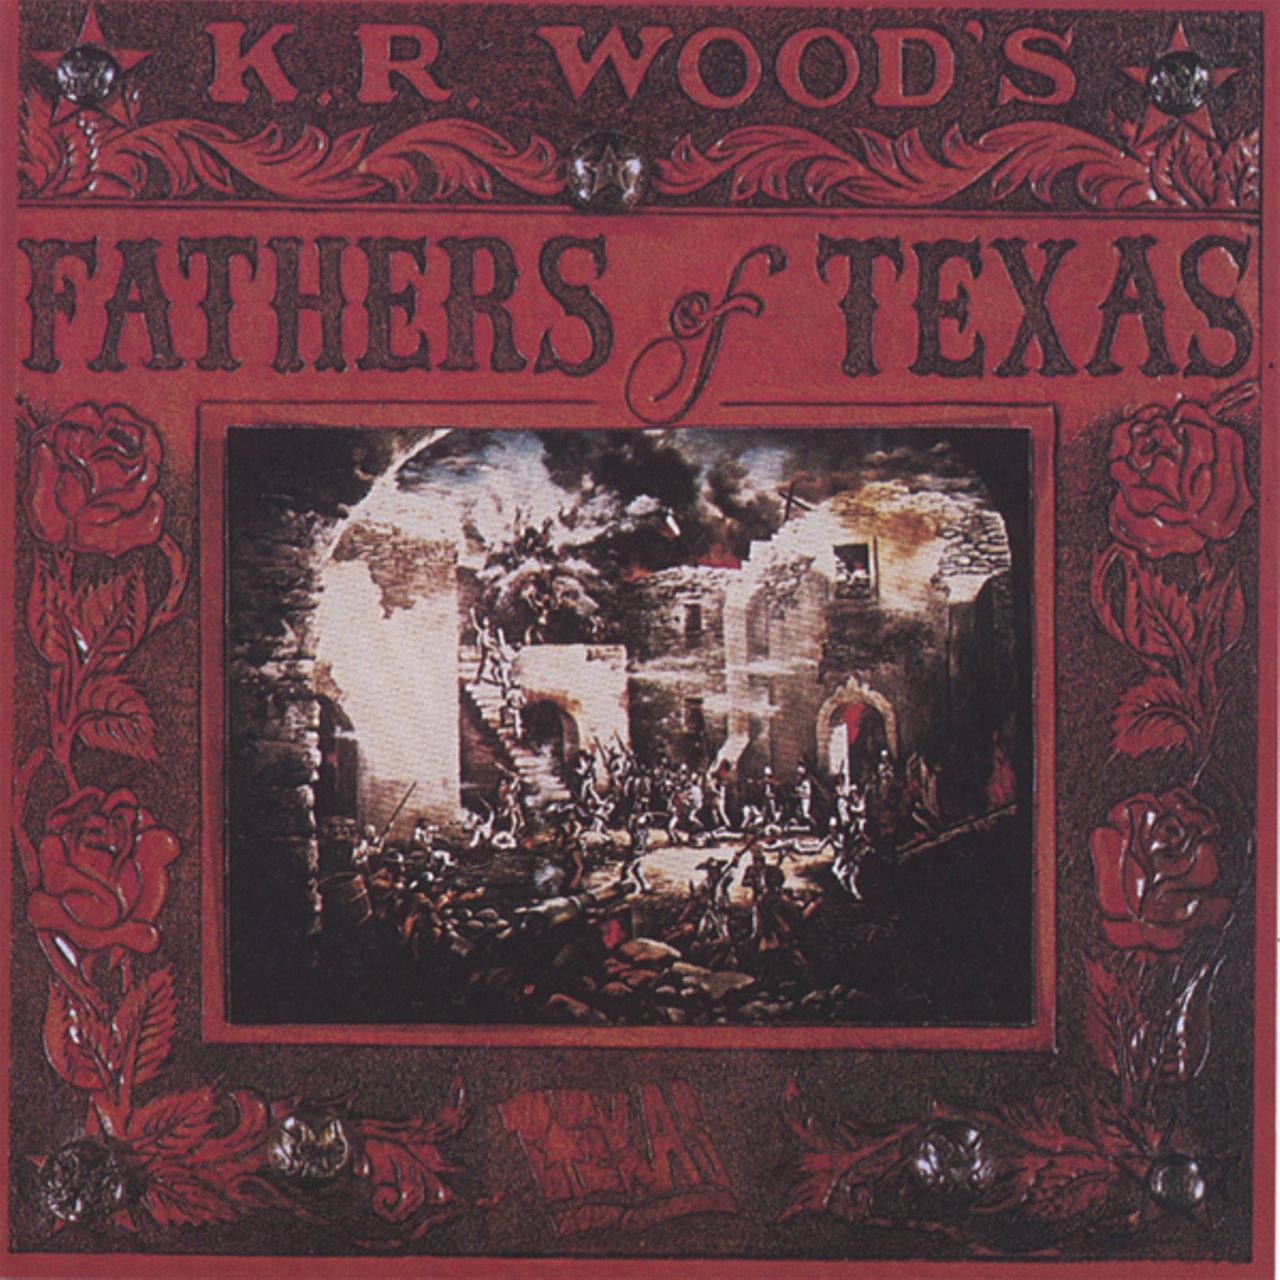 K.R. Wood - Fathers Of Texas cover album